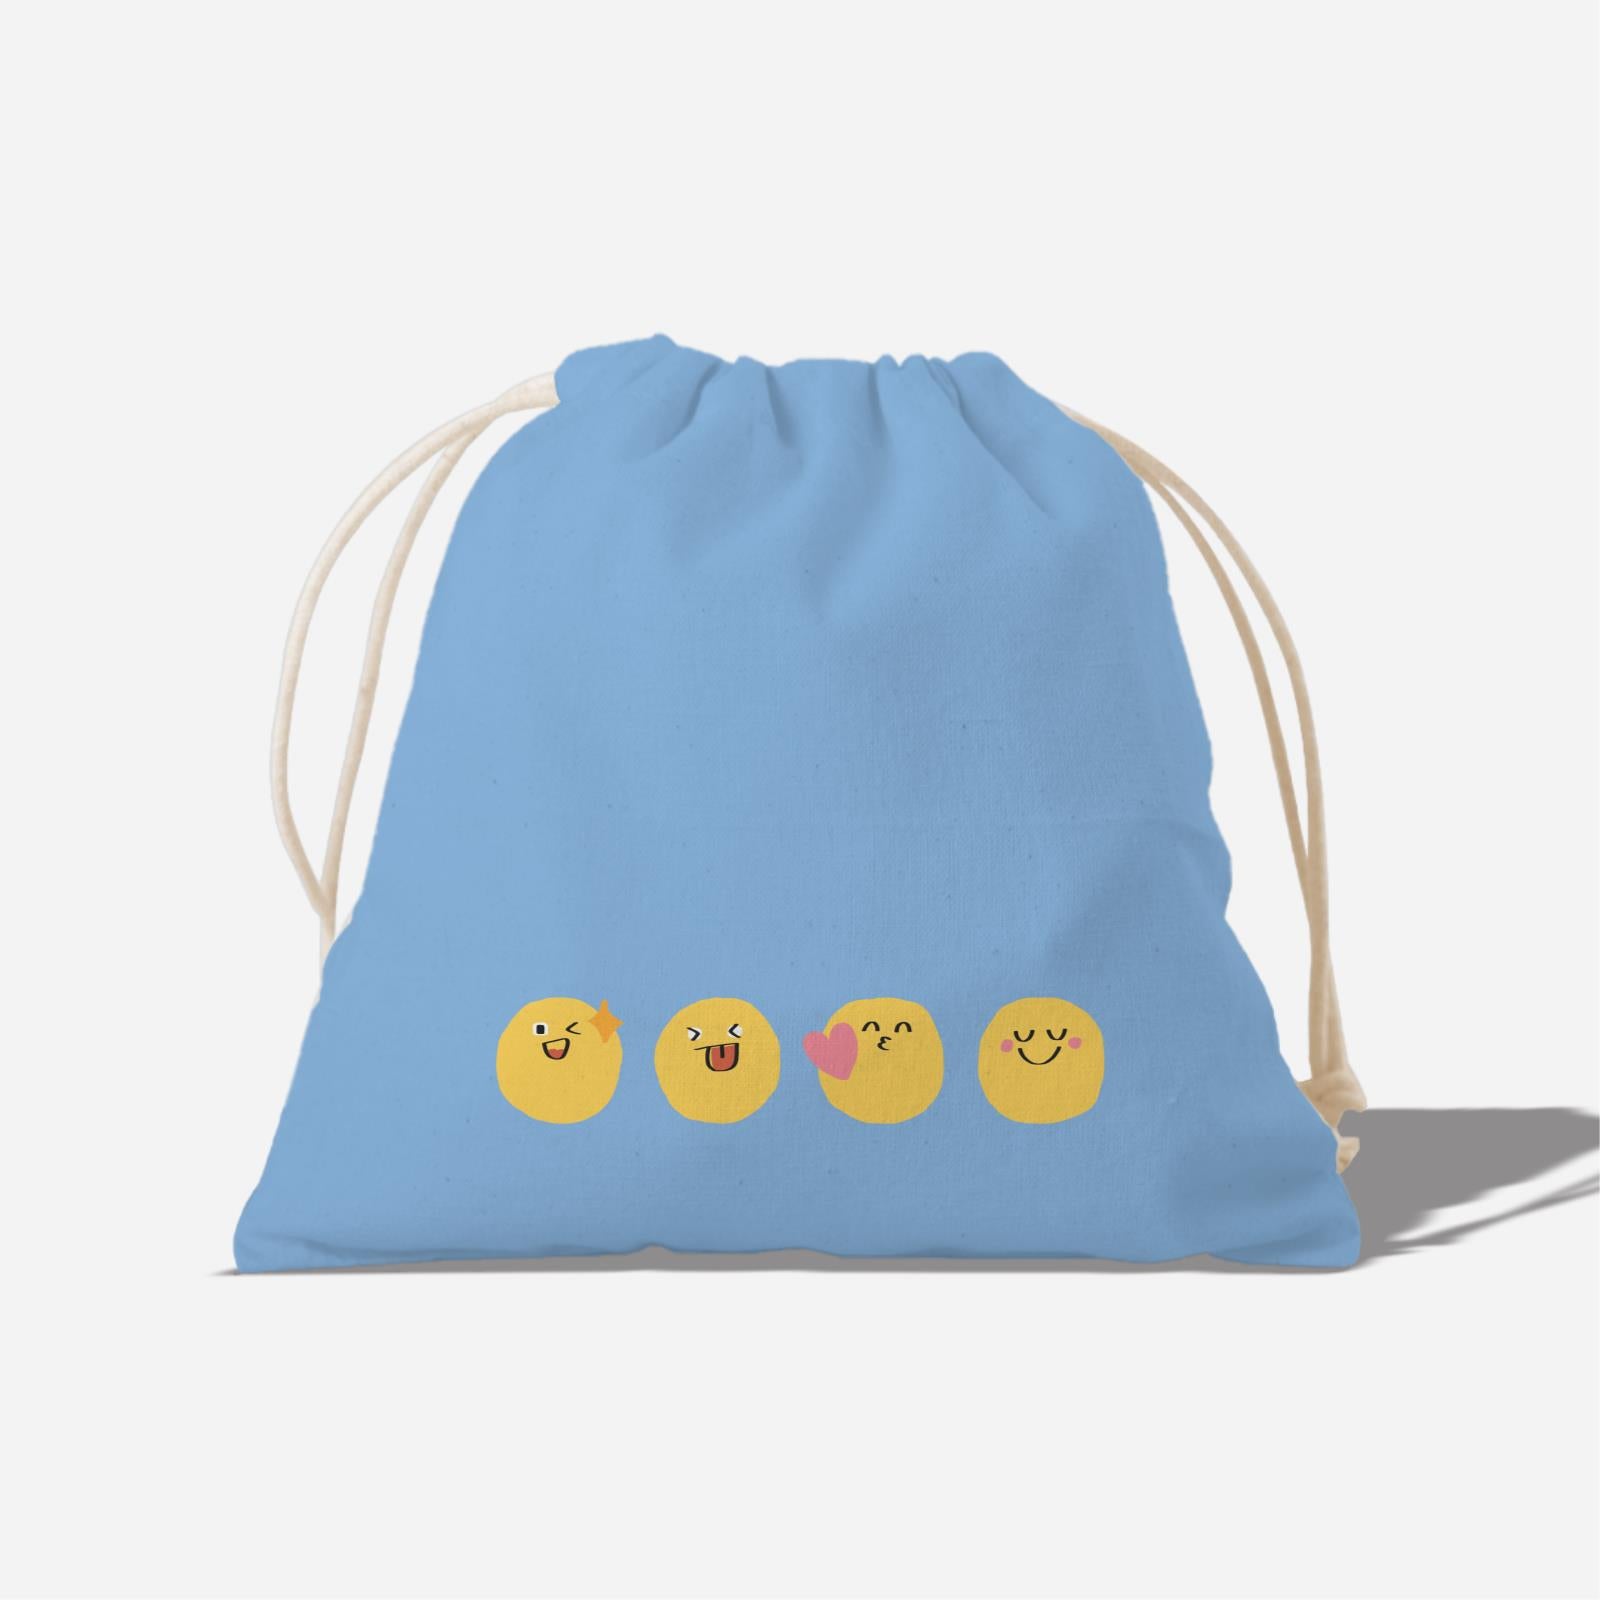 Be Confident Series Satchel - Stay Positive - Show Your Sunny Side